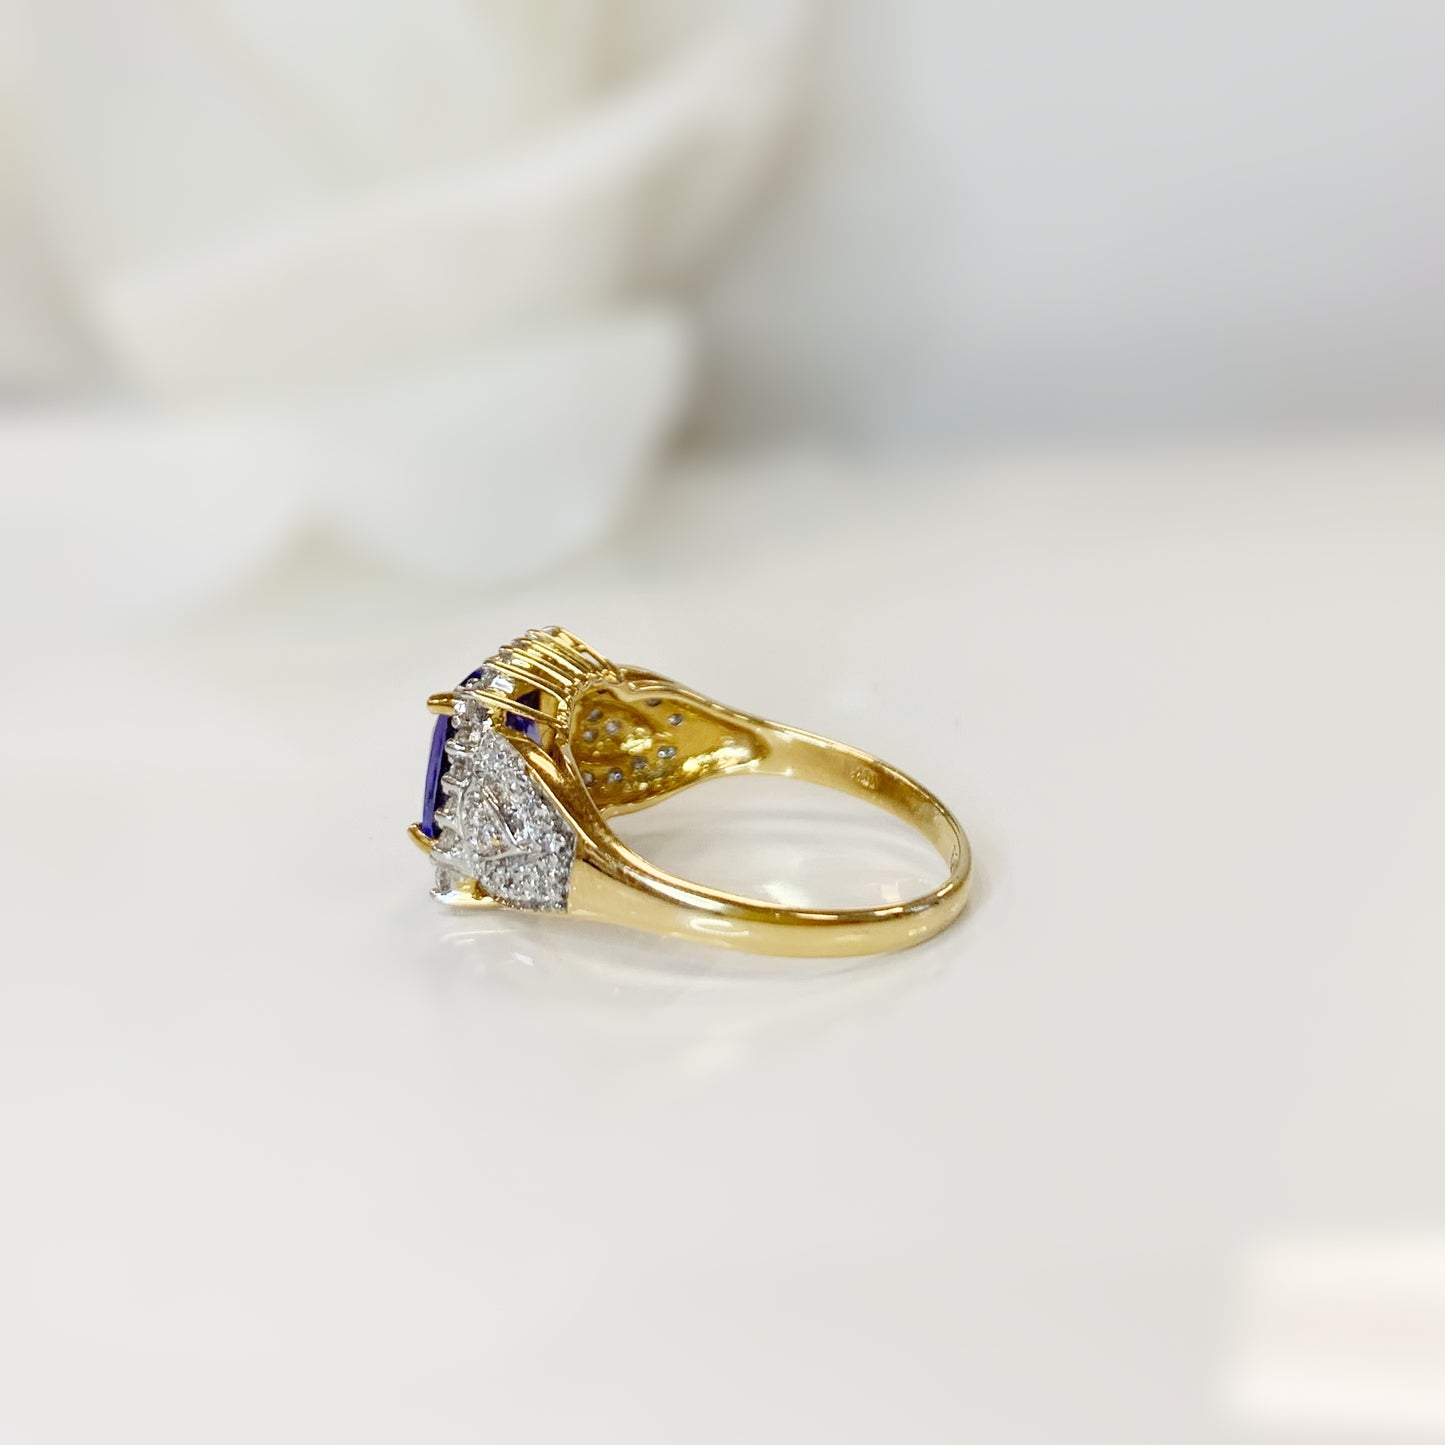 Vintage 18ct Yellow Gold Tanzanite and Diamond Cluster Ring - SIZE N